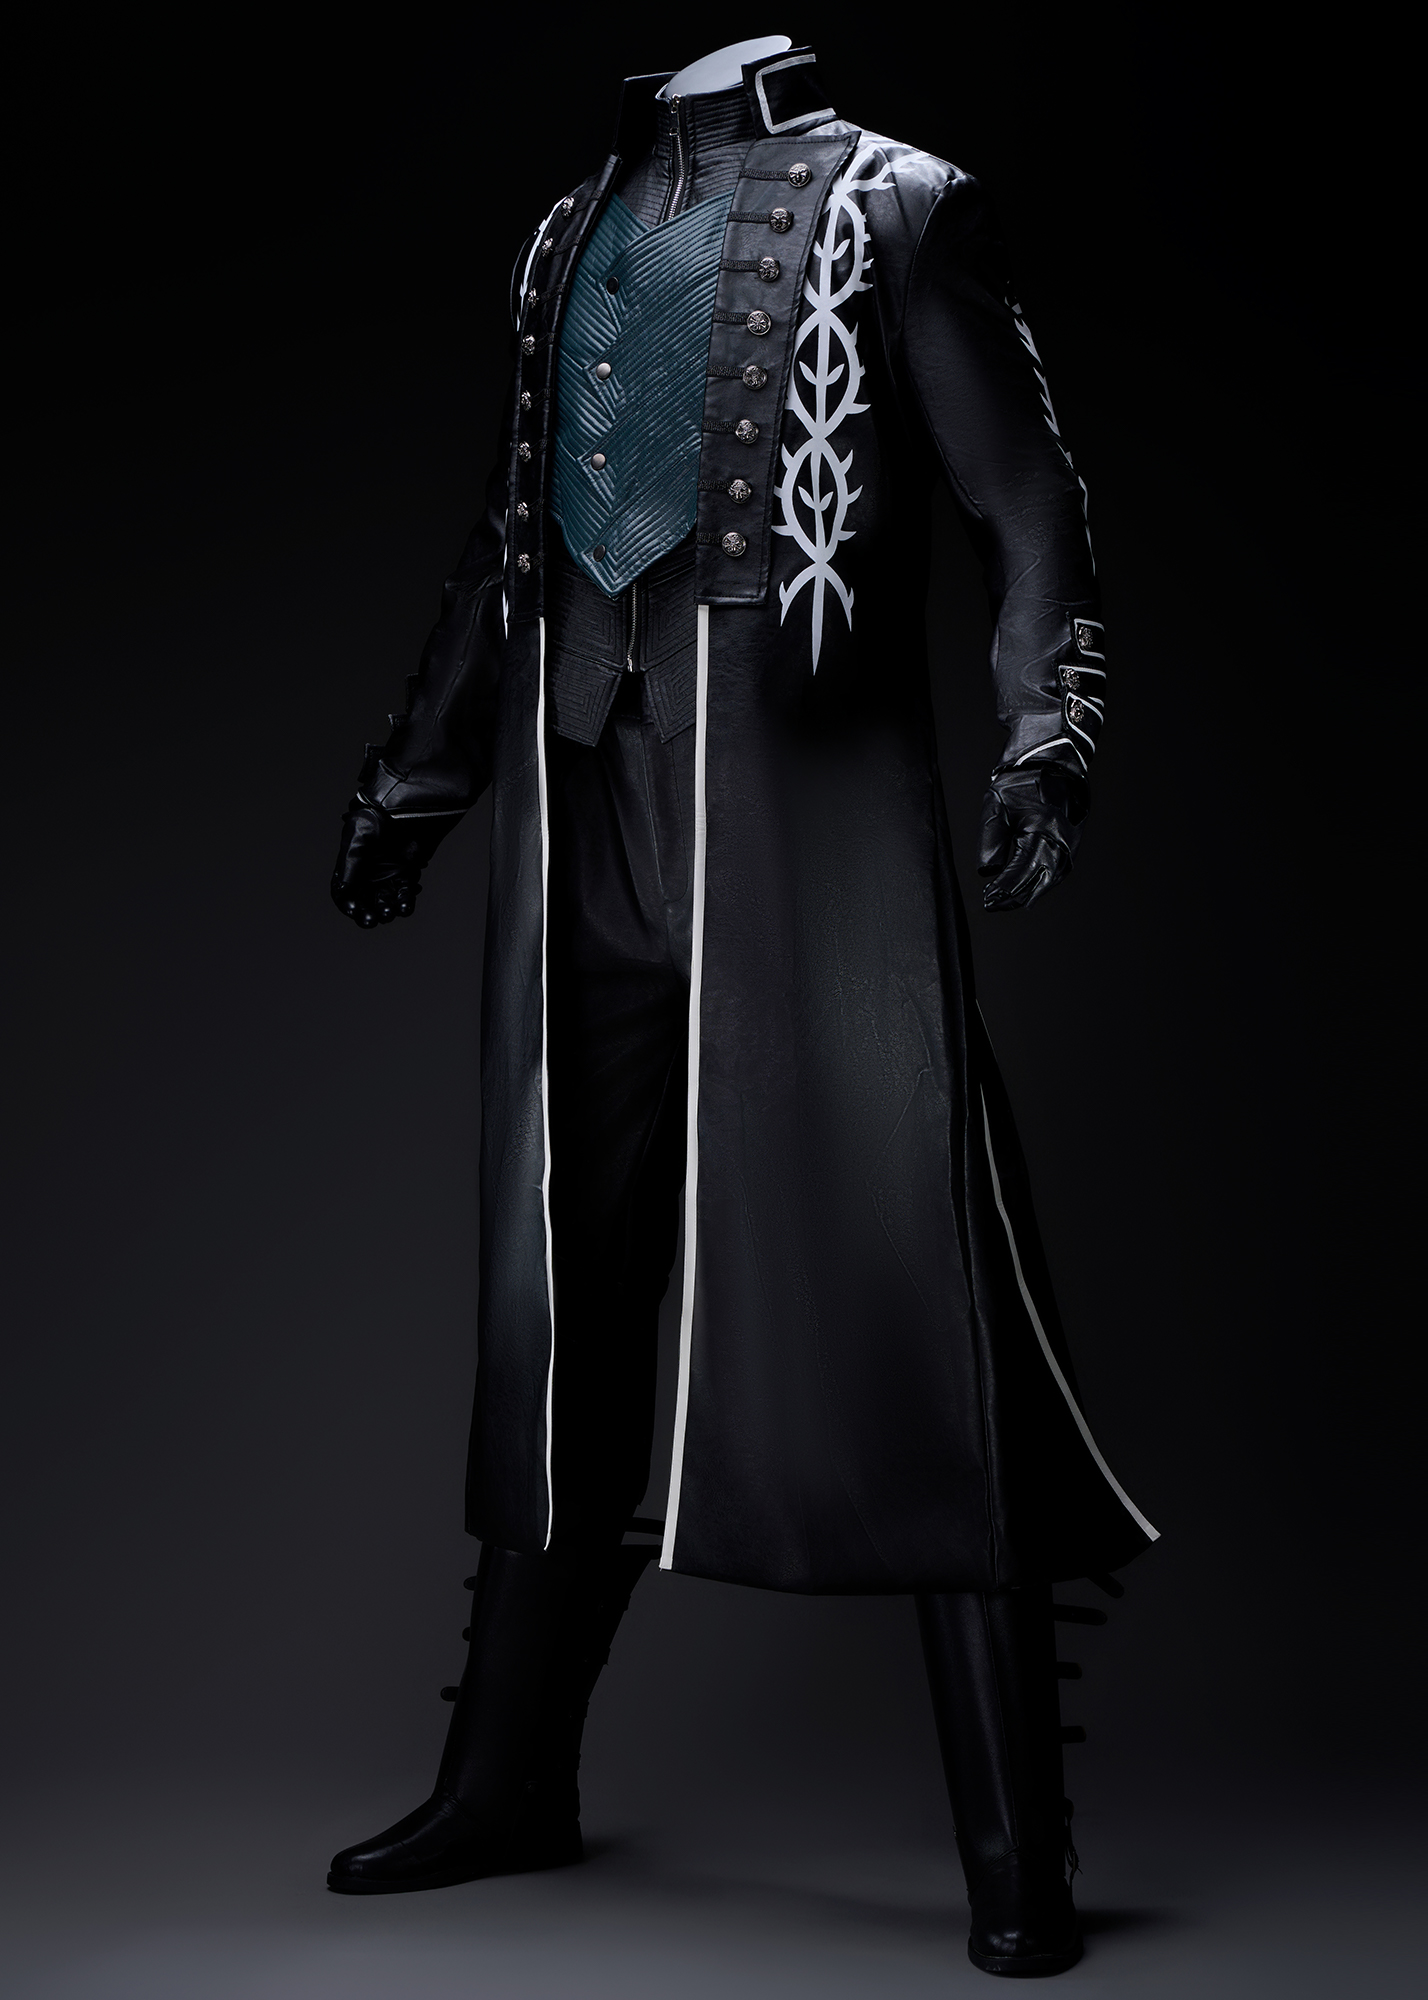 DMC5 Vergil Costume Devil May Cry V Suit Cosplay Ver.2